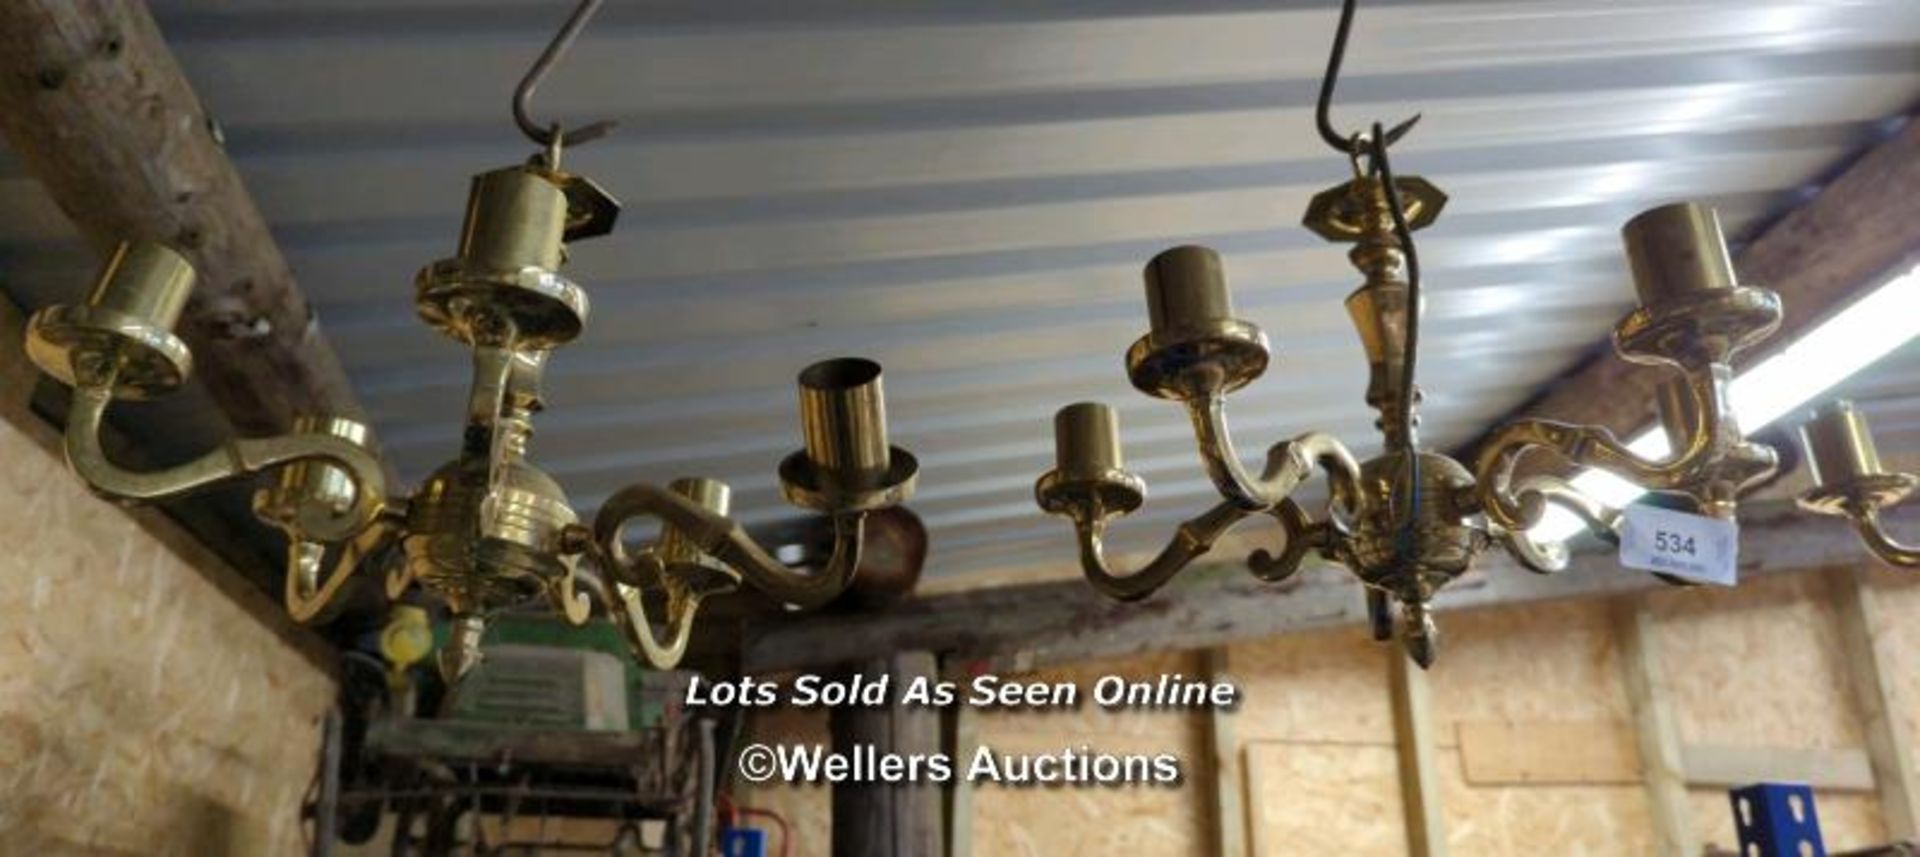 *PAIR OF FIVE BRANCH CANDELABRA CONVERTED TO ELECTRIC, 13 INCHES HIGH / ALL LOTS ARE LOCATED AT